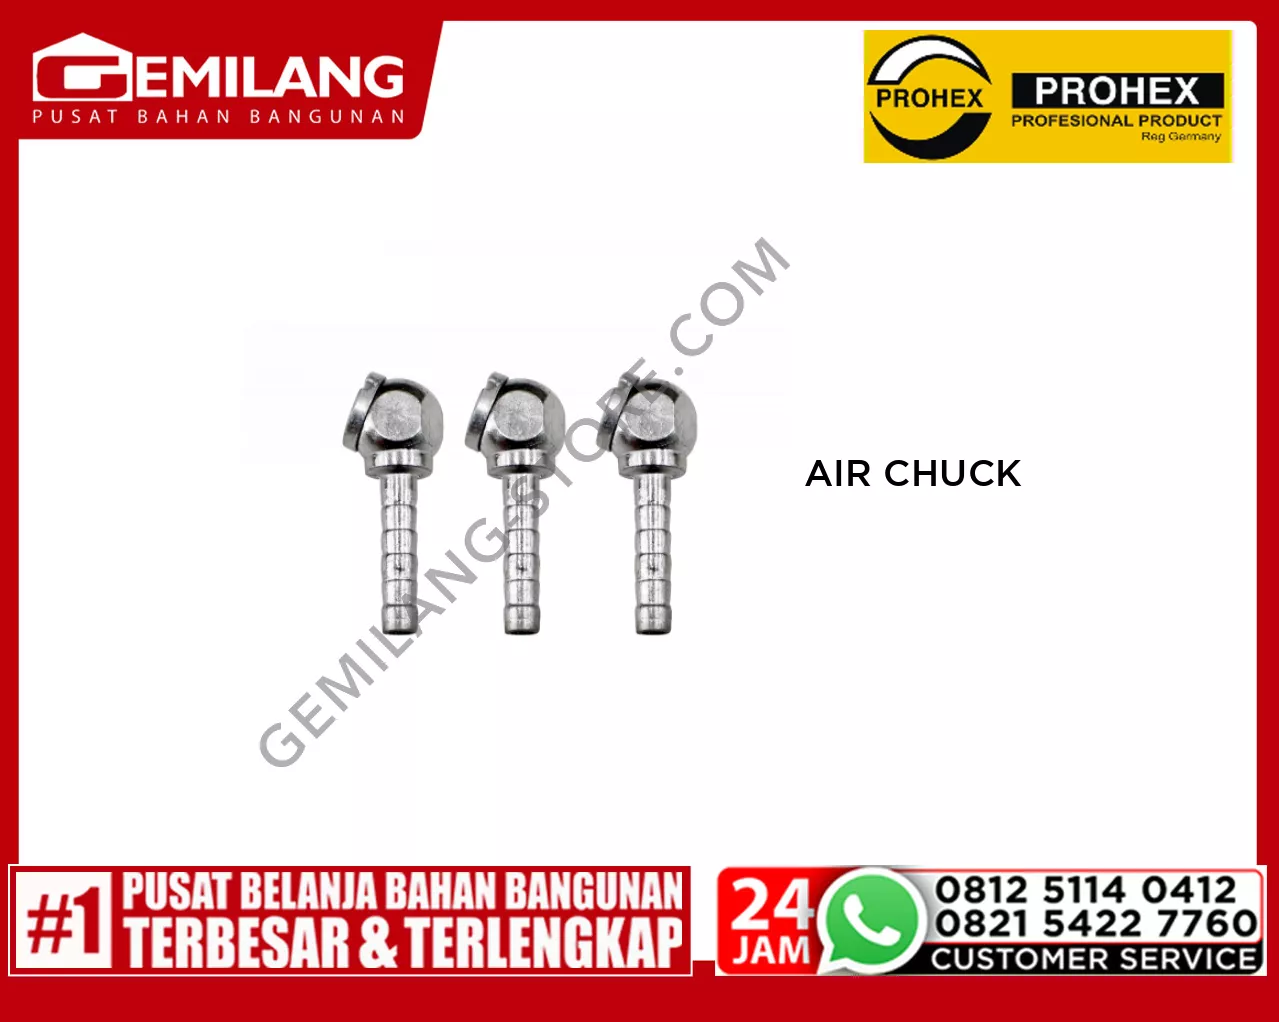 AIR CHUCK FOR TIRE PROHEX AC20H (0210-200)